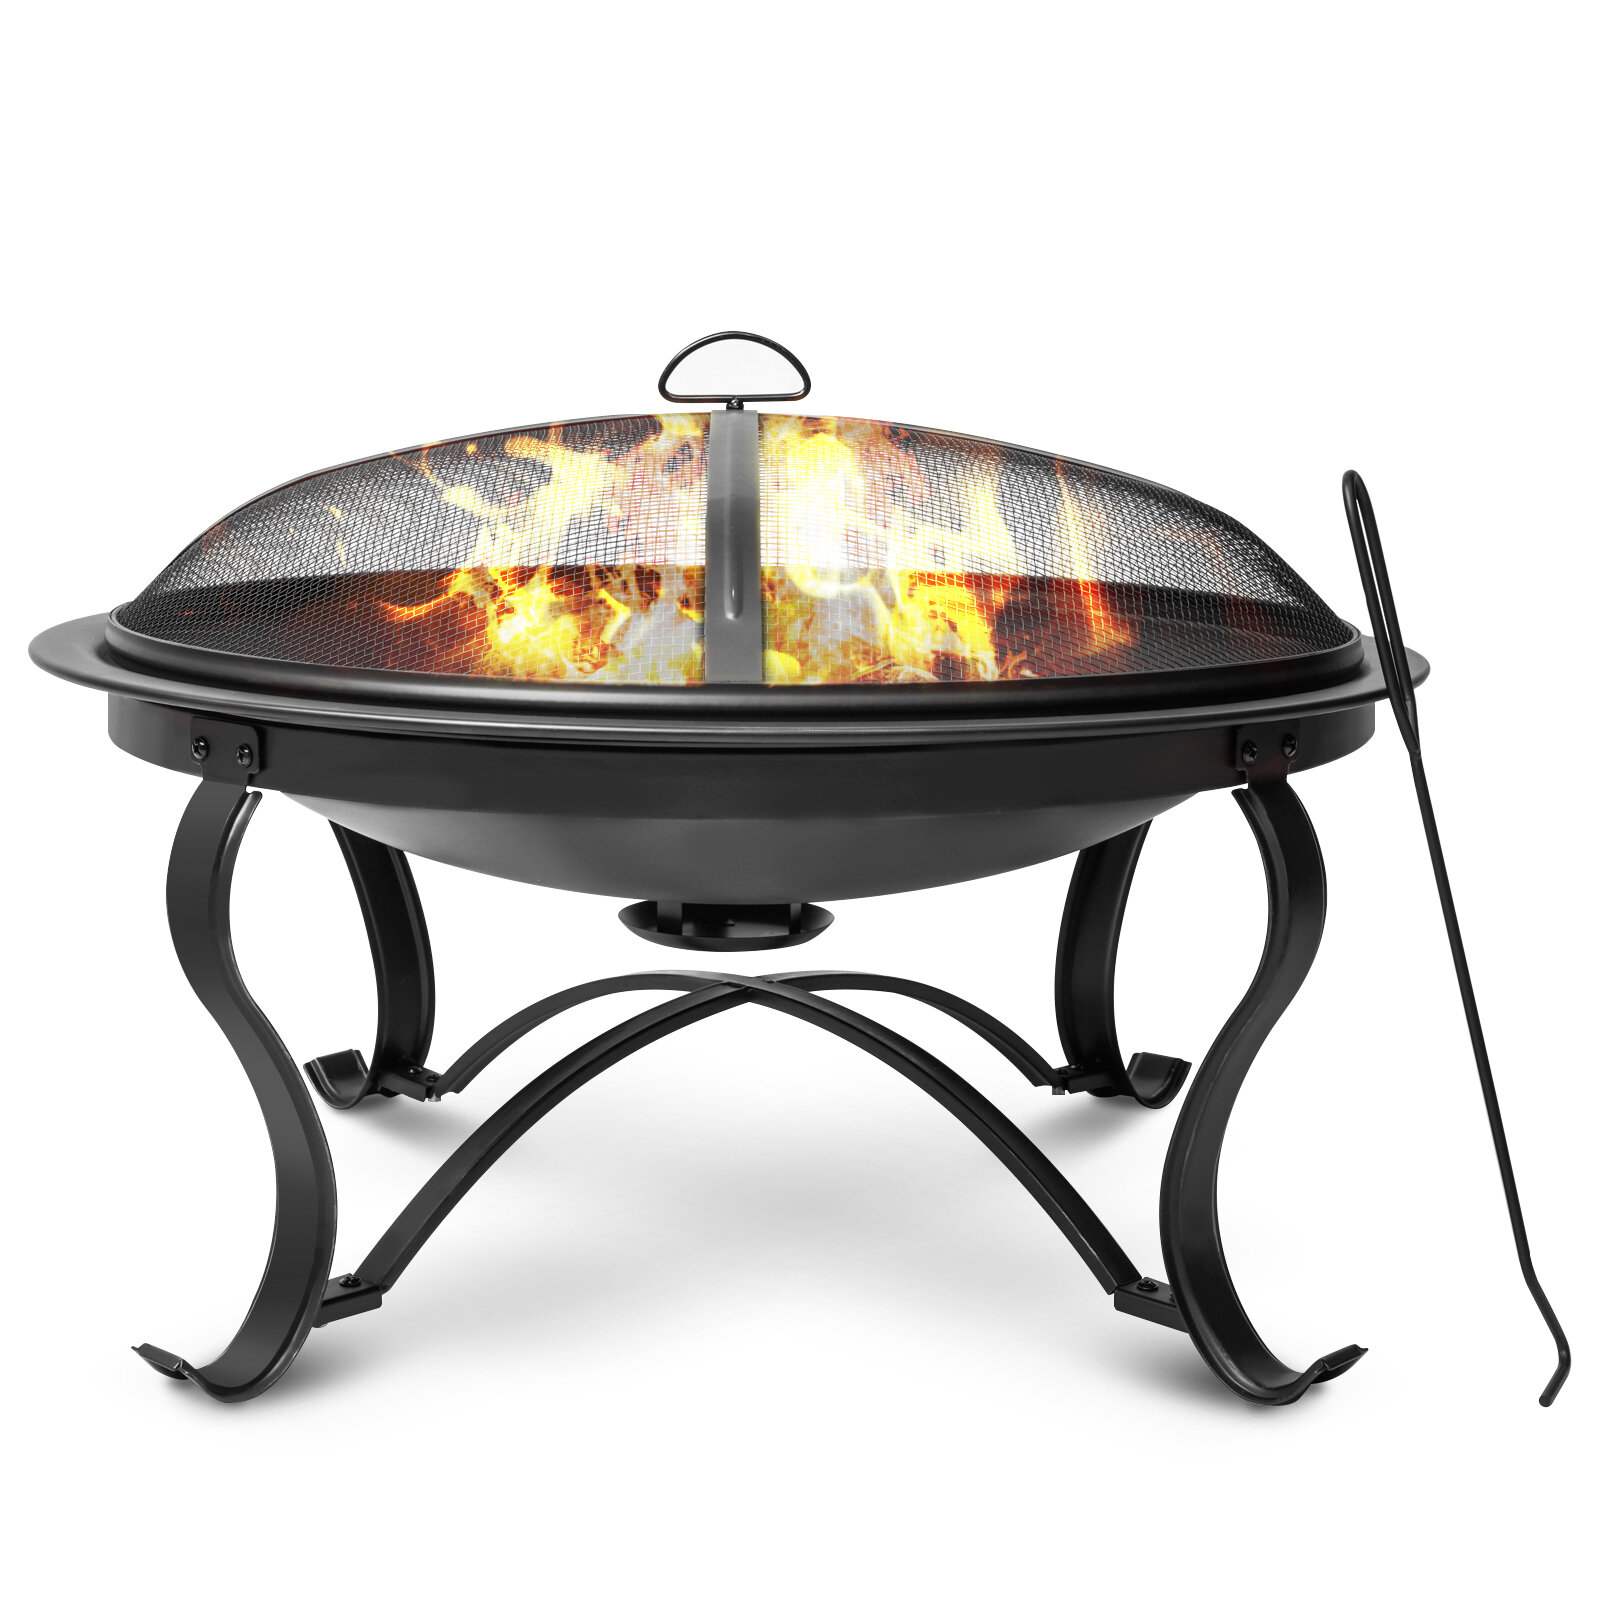 

Kingso 30 inch Fire Pits Steel Wood Burning Firepit with Ash Plate Spark Screen Log Grate Poker